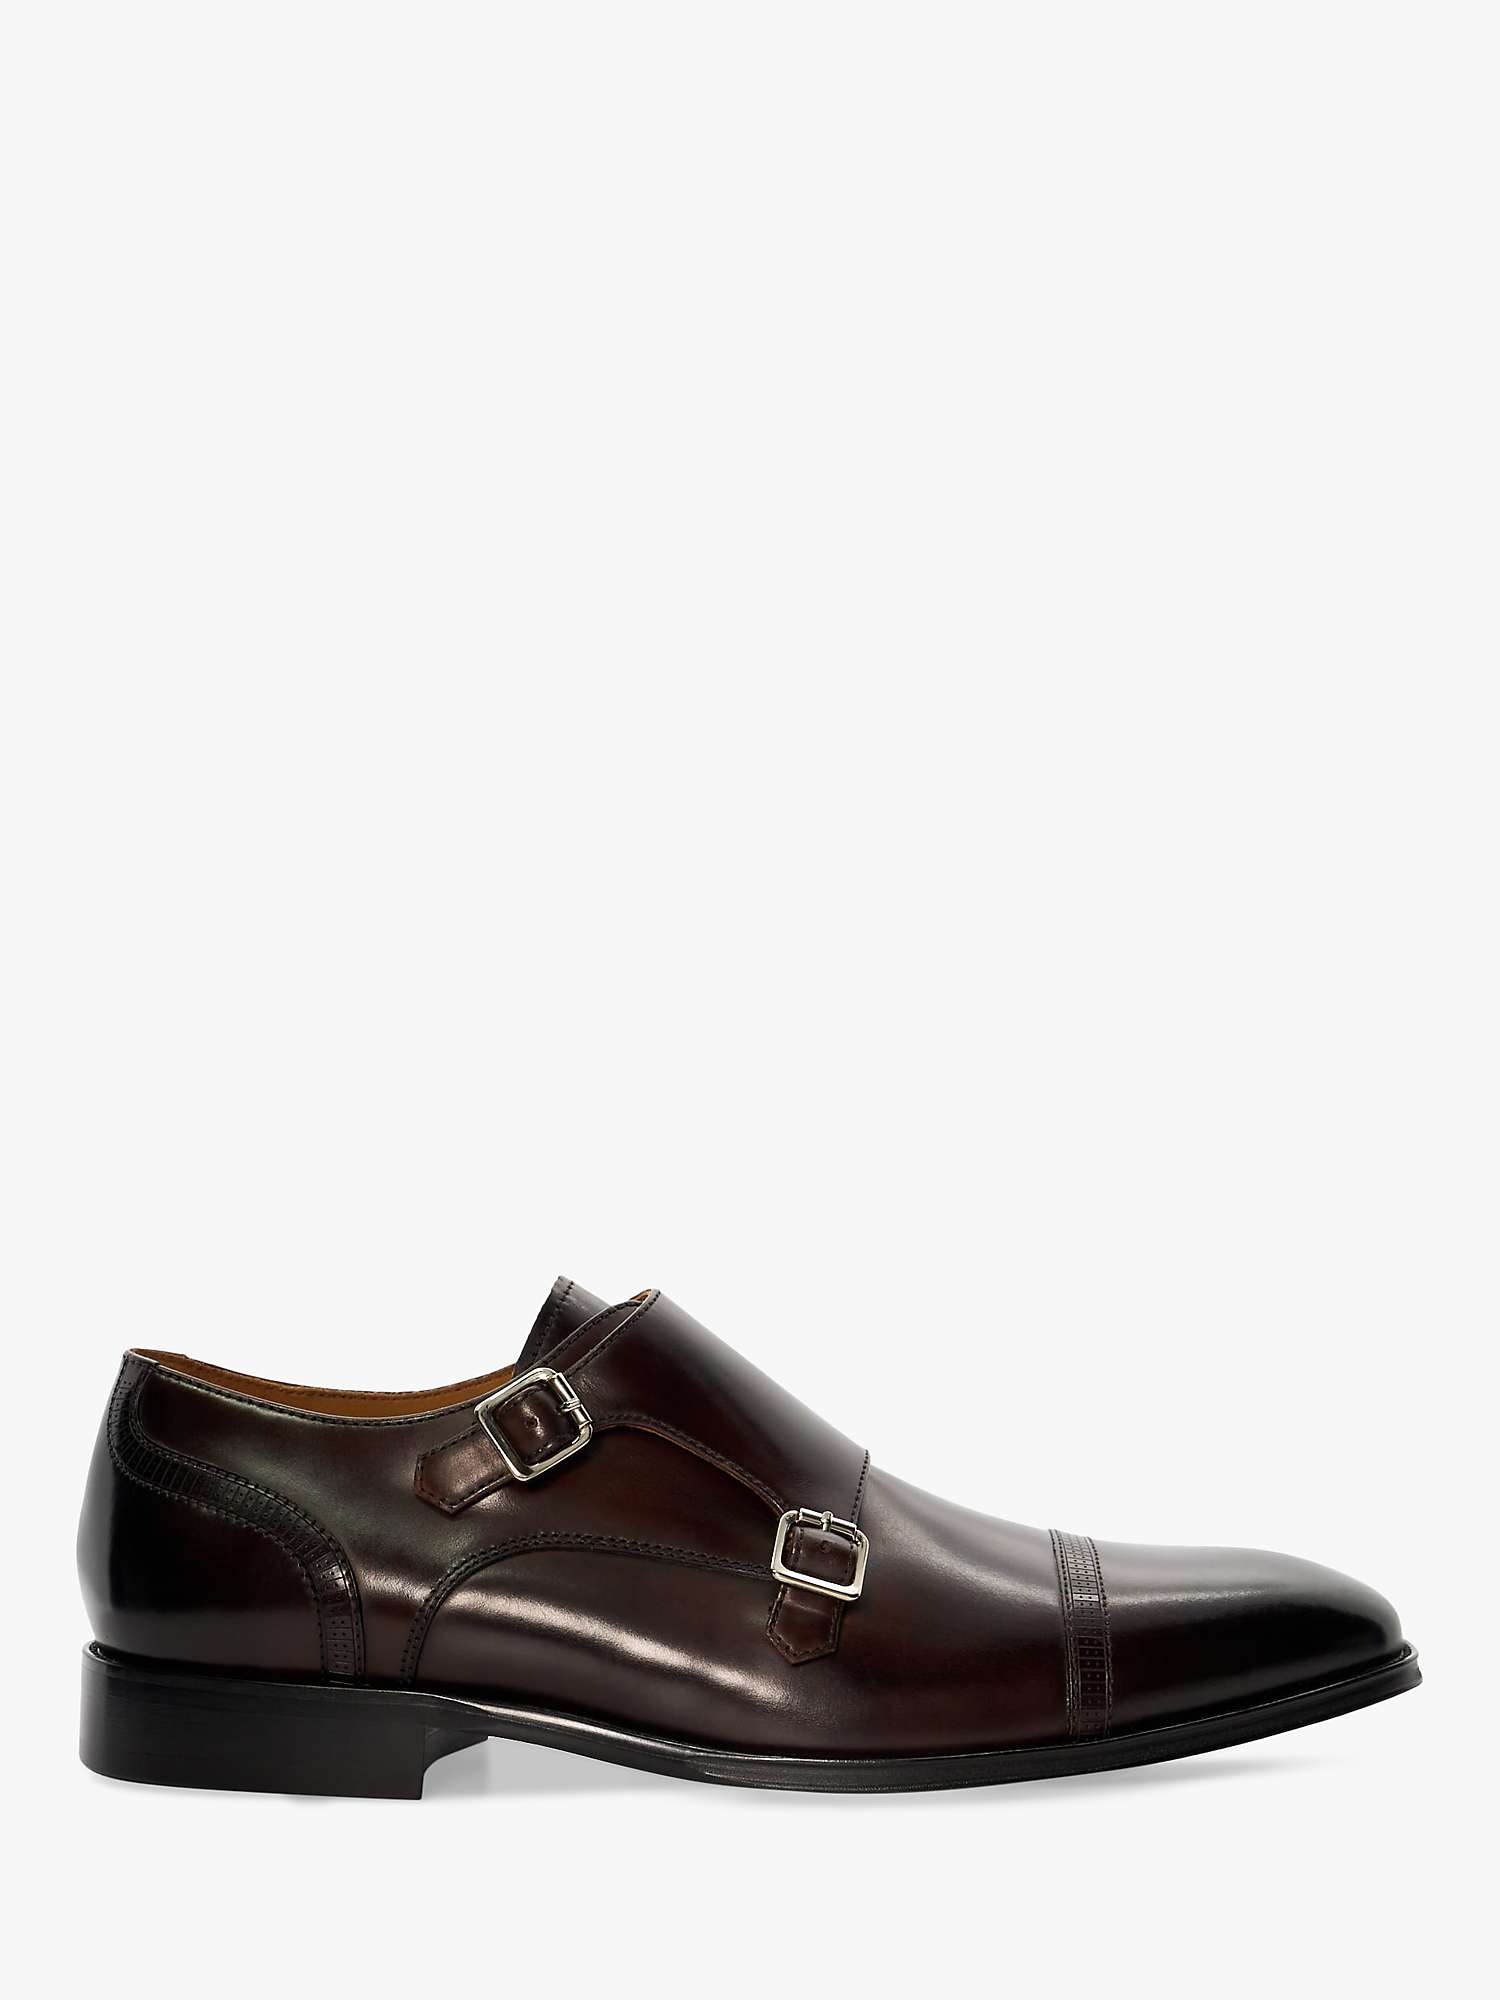 Buy Dune Saloon Leather Double Monk Shoes Online at johnlewis.com